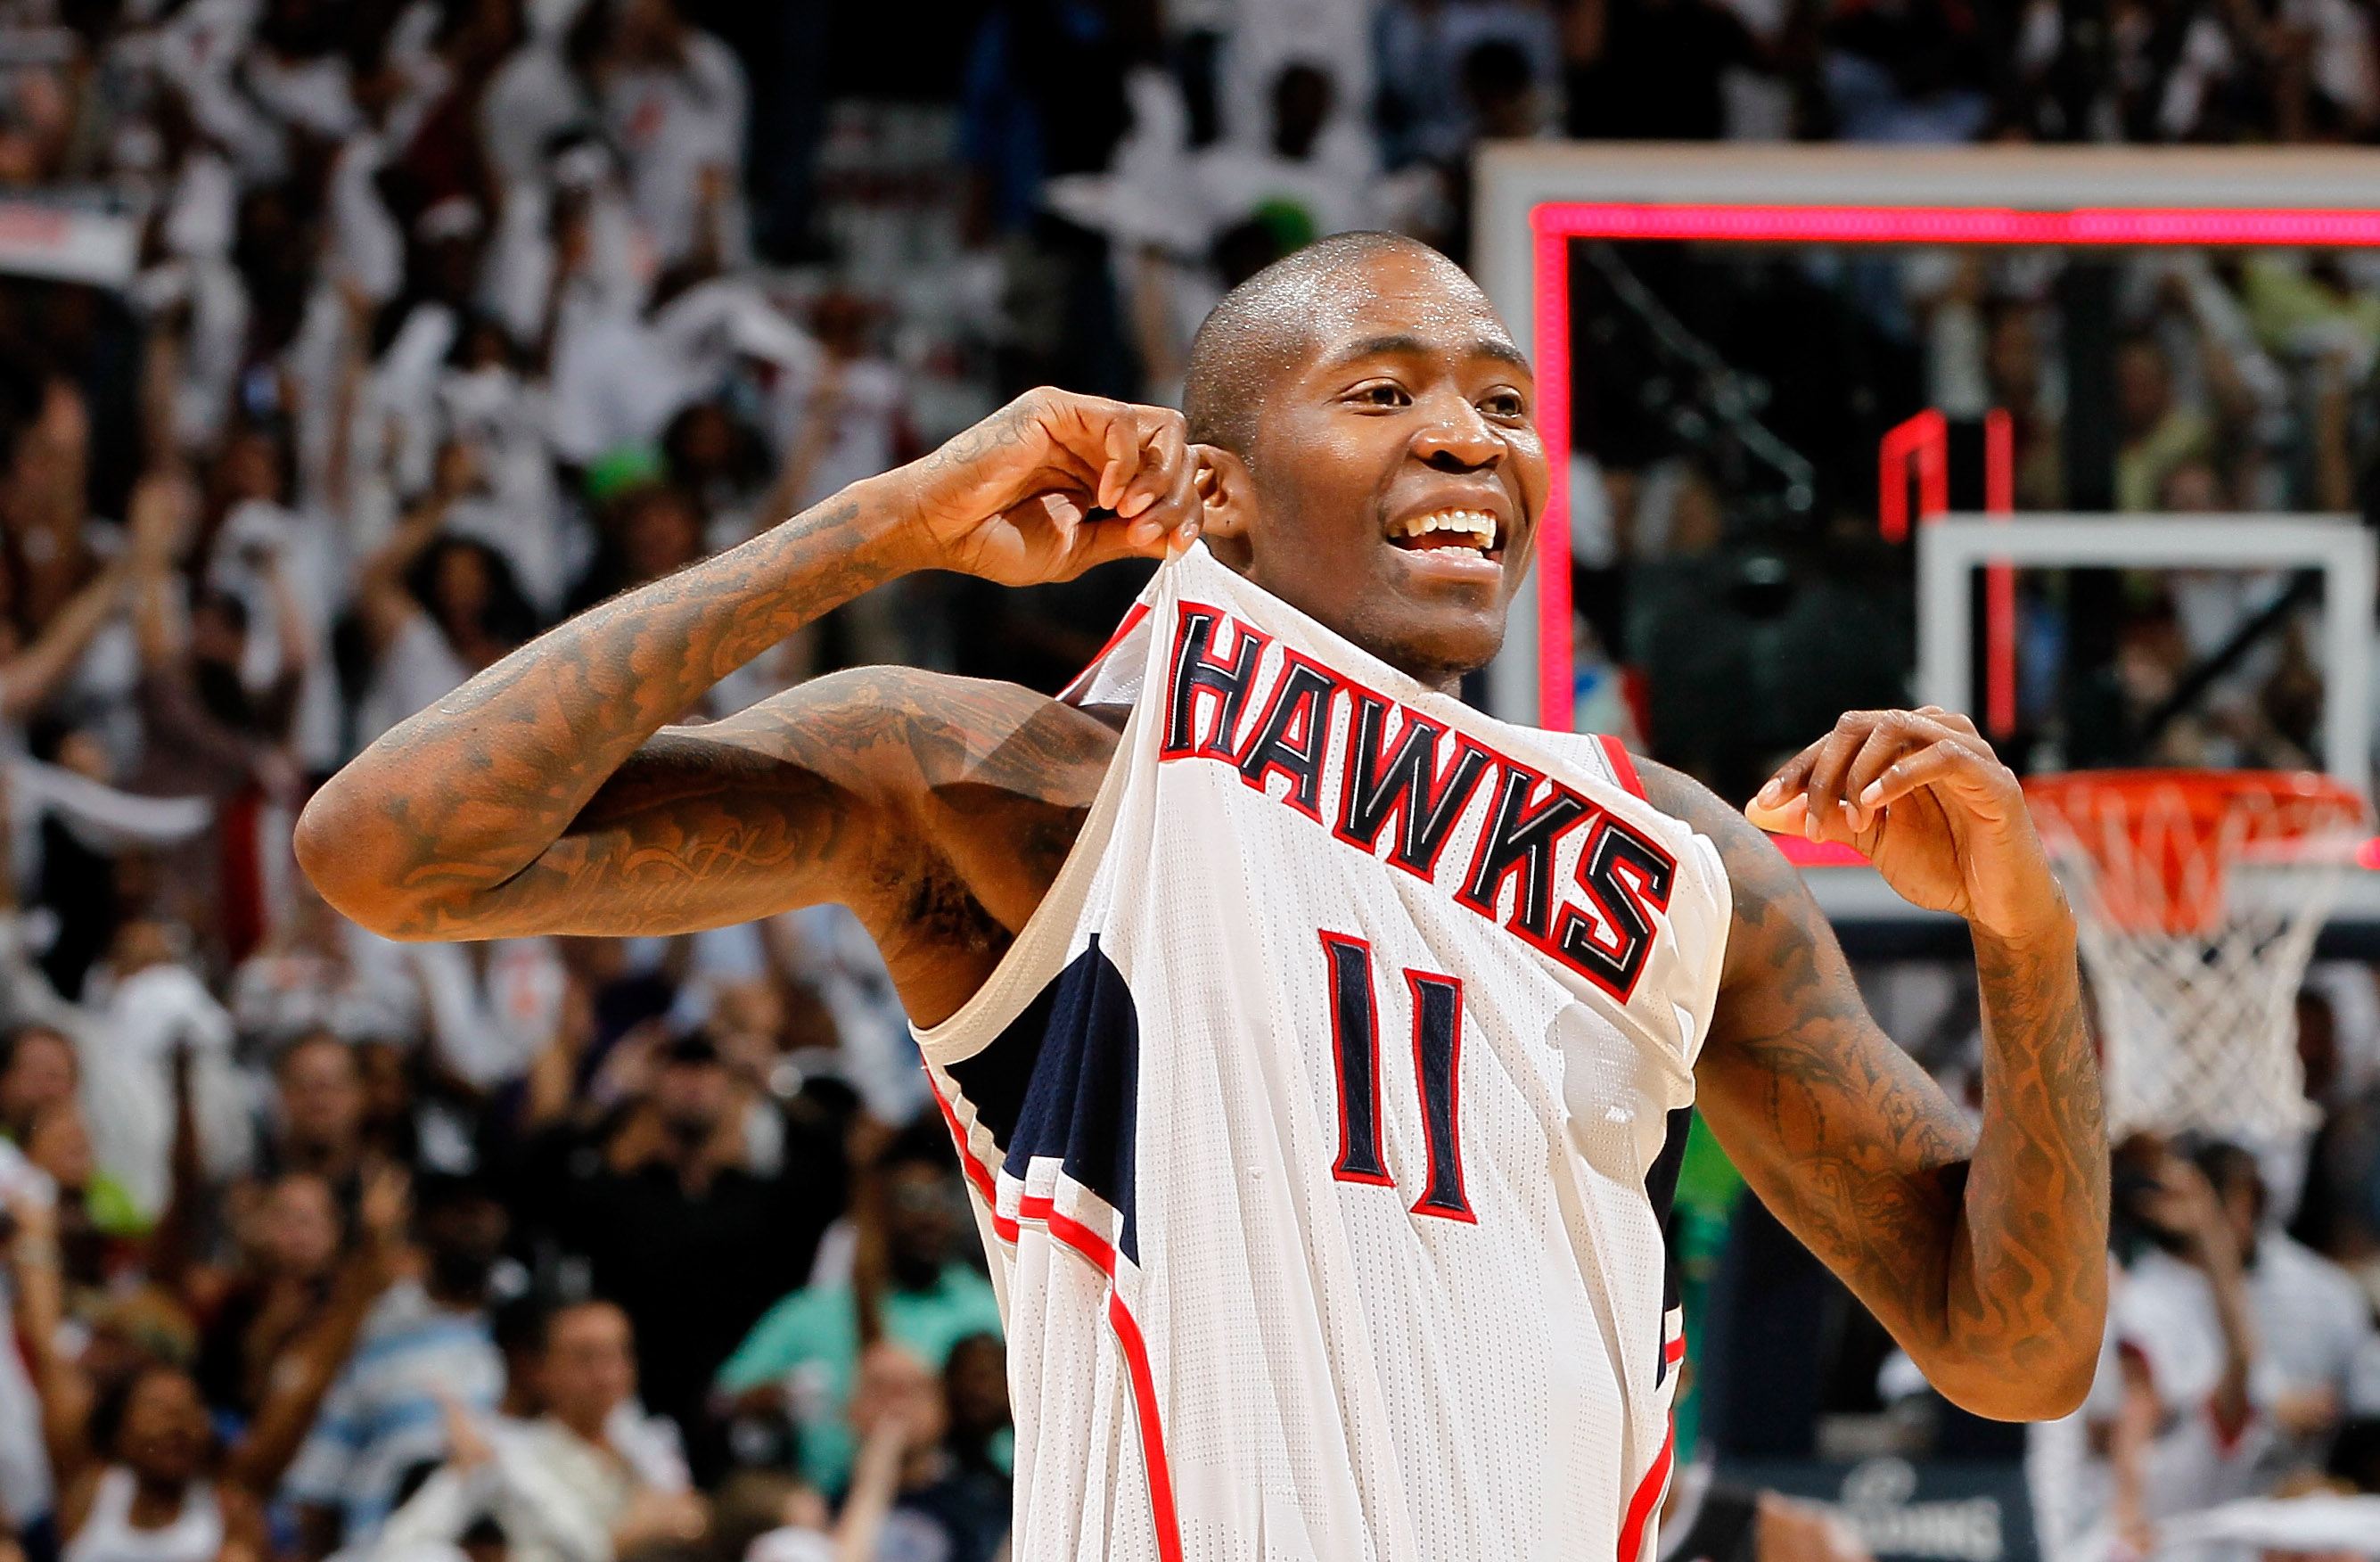 ATLANTA, GA - APRIL 28:  Jamal Crawford #11 of the Atlanta Hawks reacts after their 84-81 win over the Orlando Magic during Game Six of the Eastern Conference Quarterfinals in the 2011 NBA Playoffs at Philips Arena on April 28, 2011 in Atlanta, Georgia.